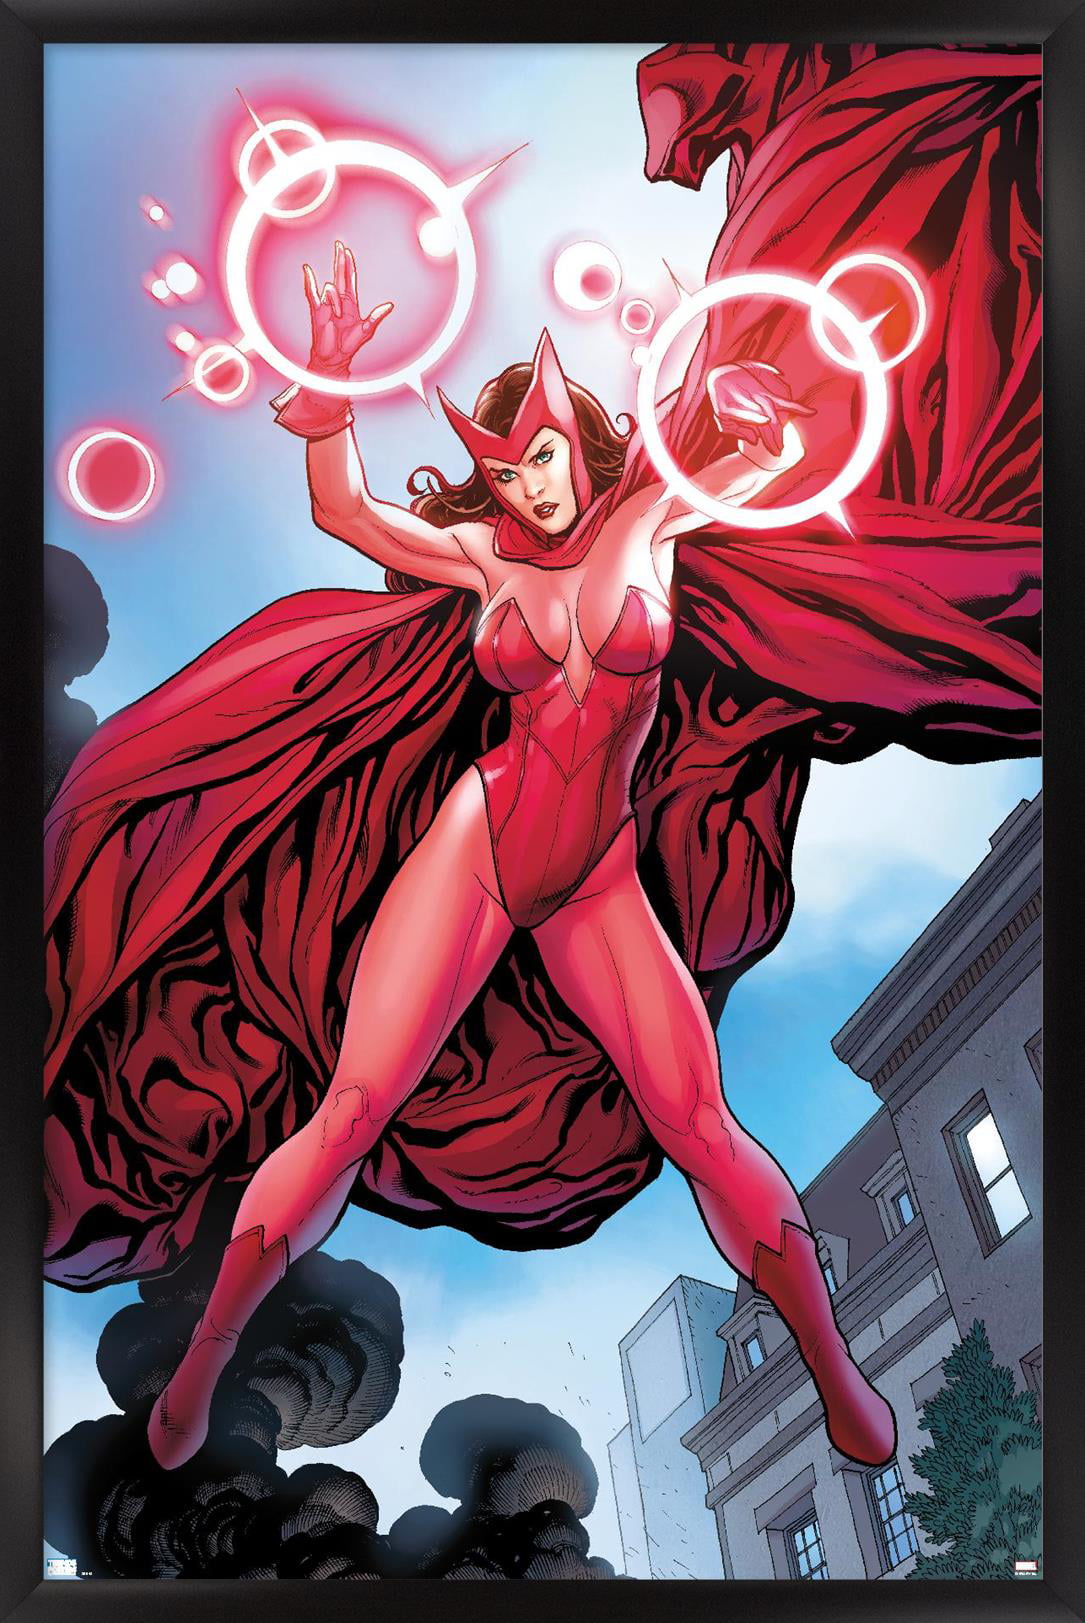 Marvel Comics - Scarlet Witch - Avengers Vs. X-Men #0 Wall Poster, 22.375  x 34 